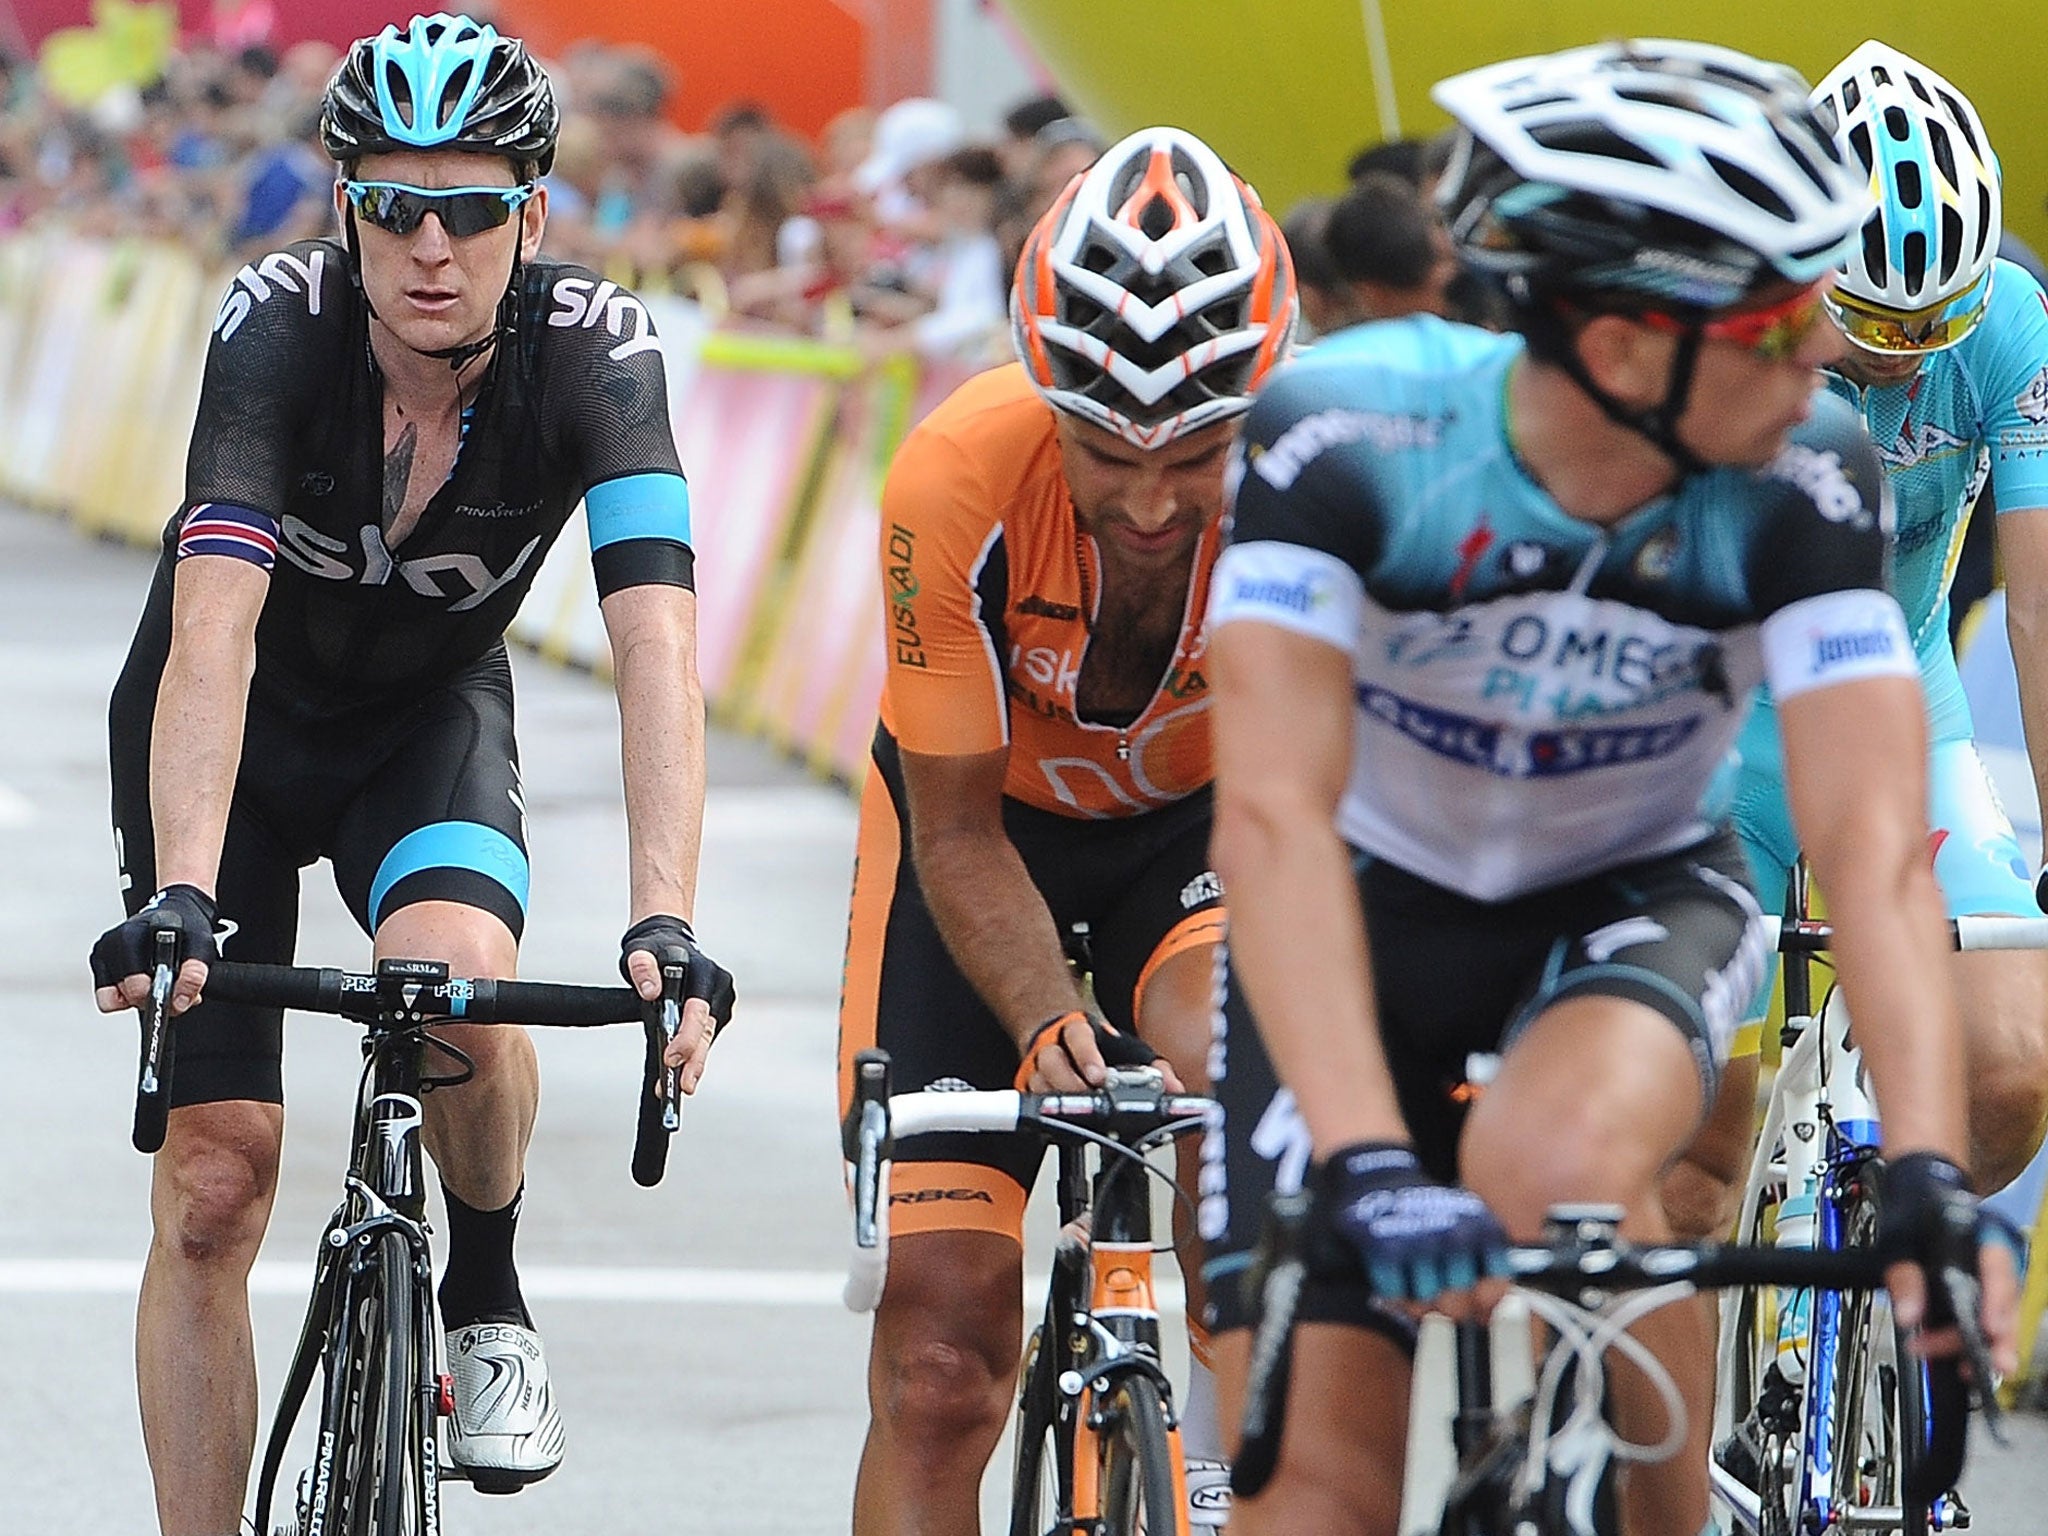 Back pedalling: Sir Bradley Wiggins (left) finishes the first stage